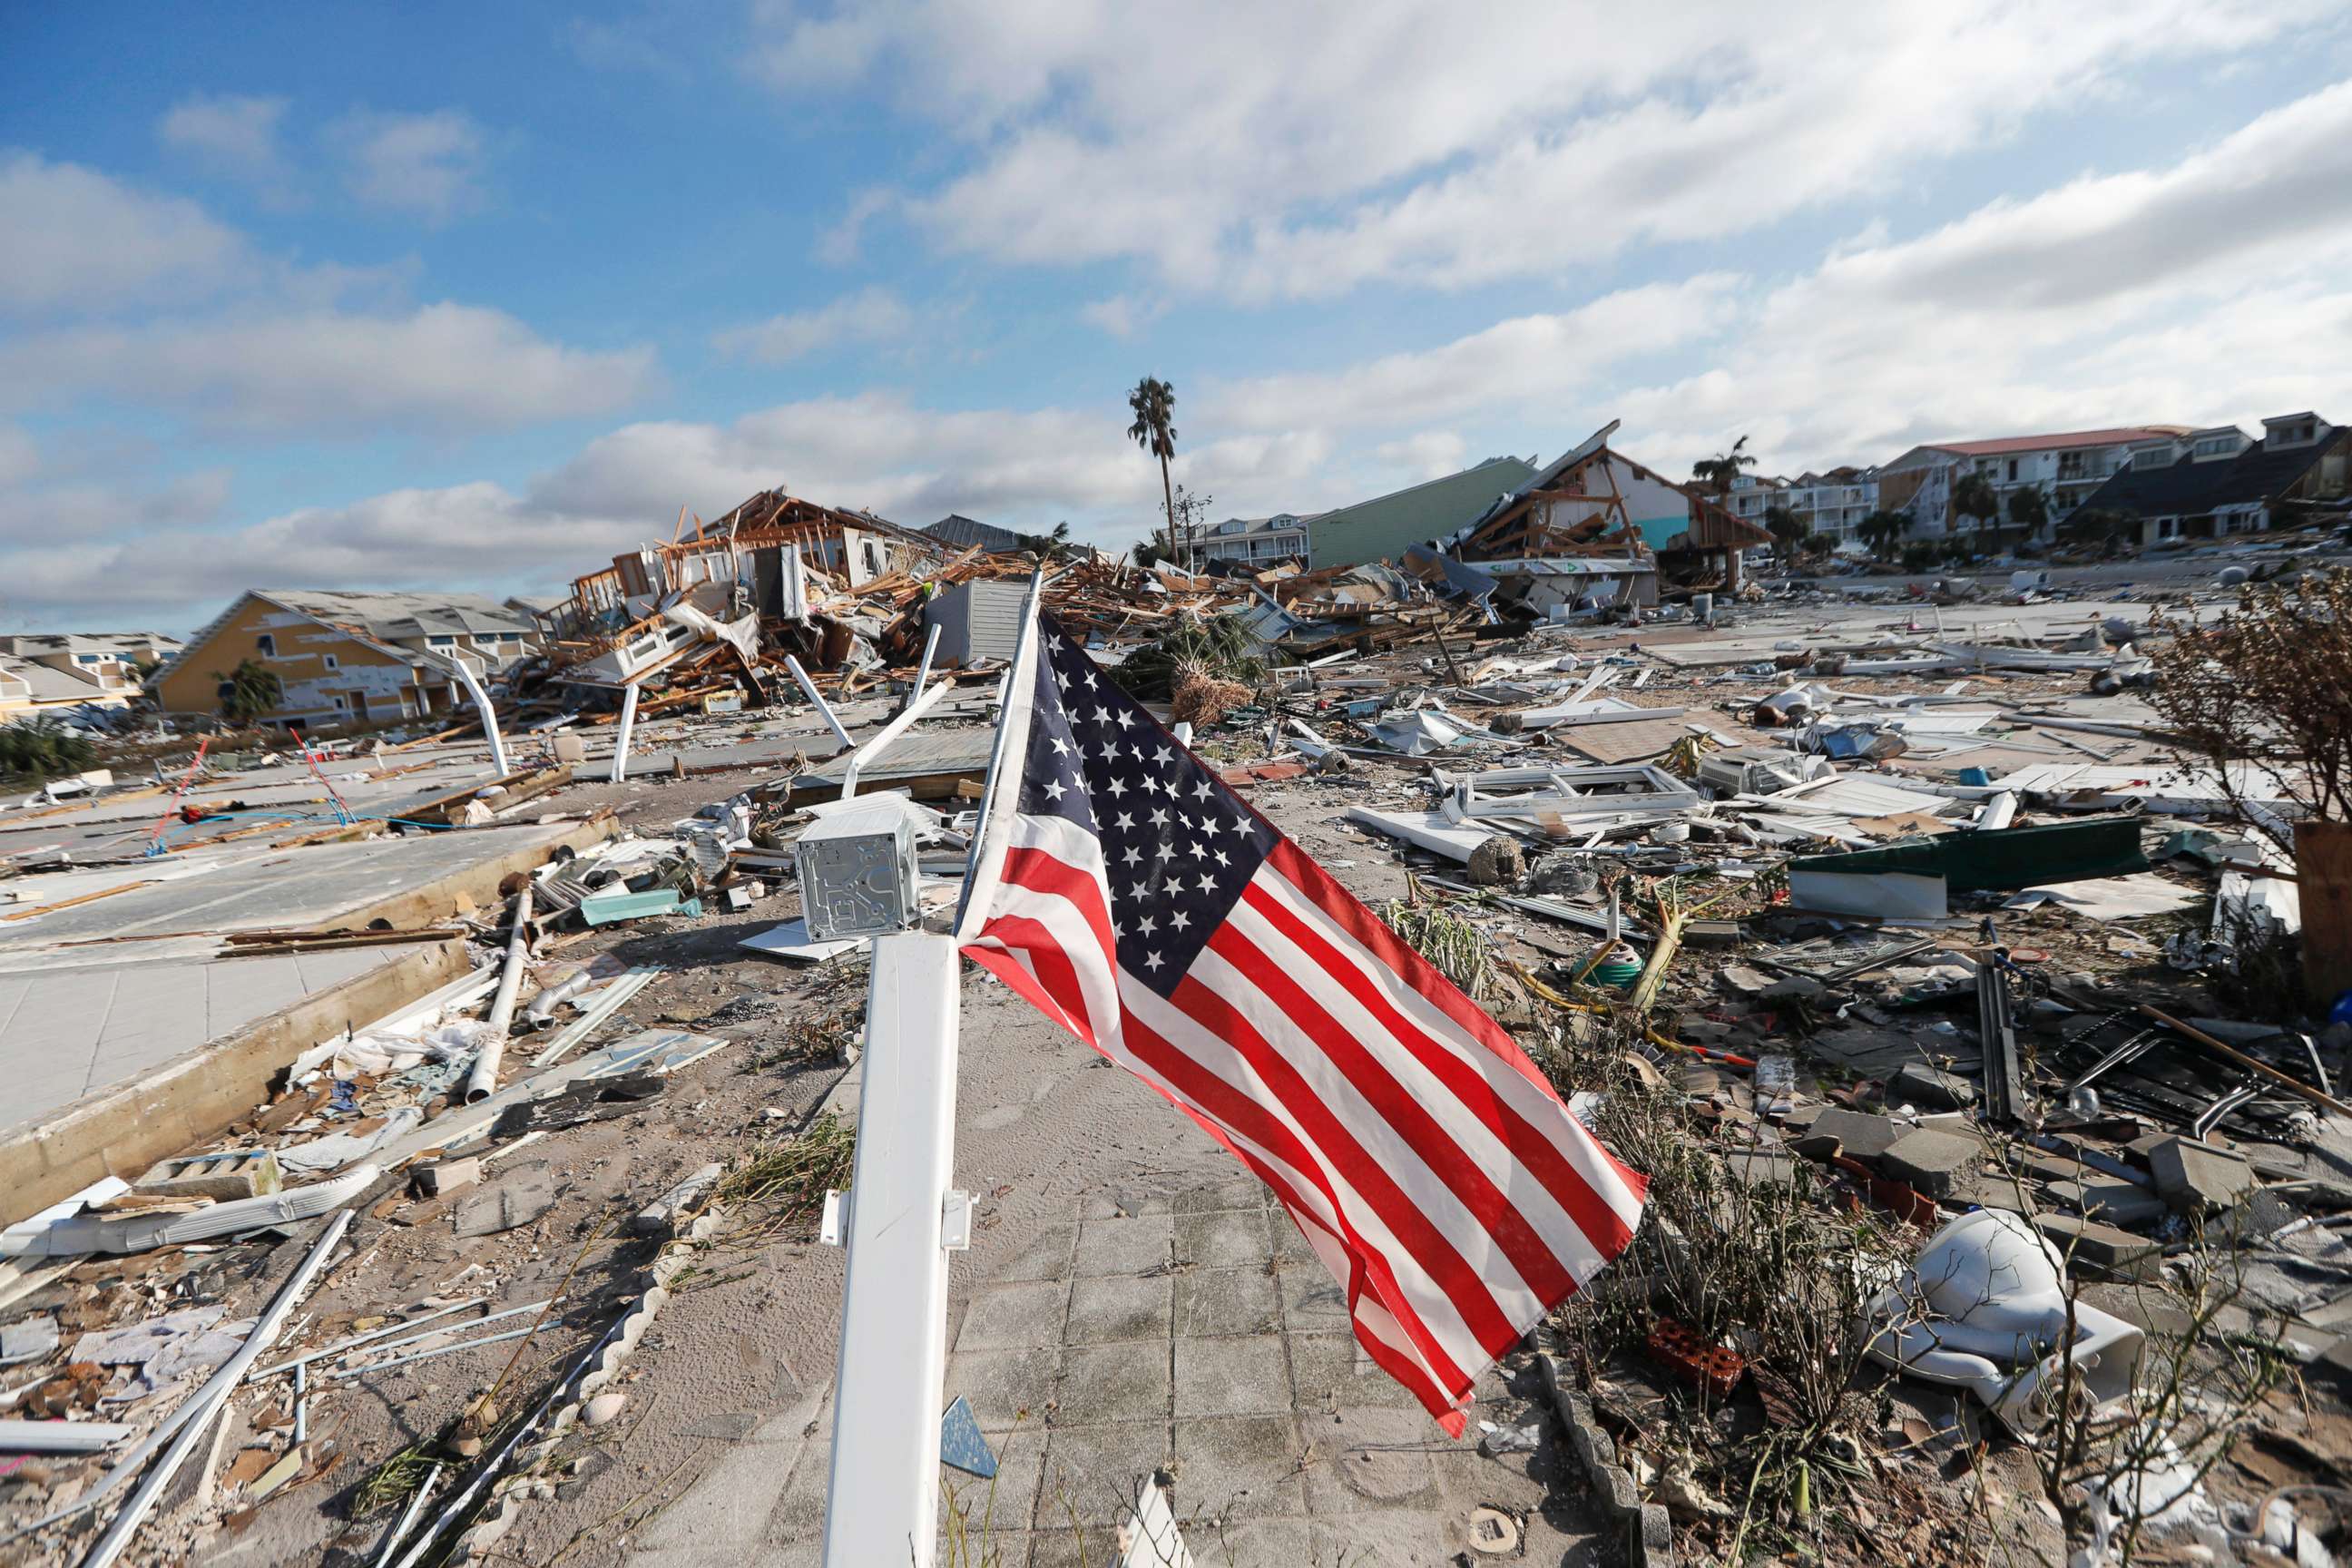 PHOTO: An American flag flies amidst destruction in the aftermath of Hurricane Michael in Mexico Beach, Fla., Oct. 11, 2018.